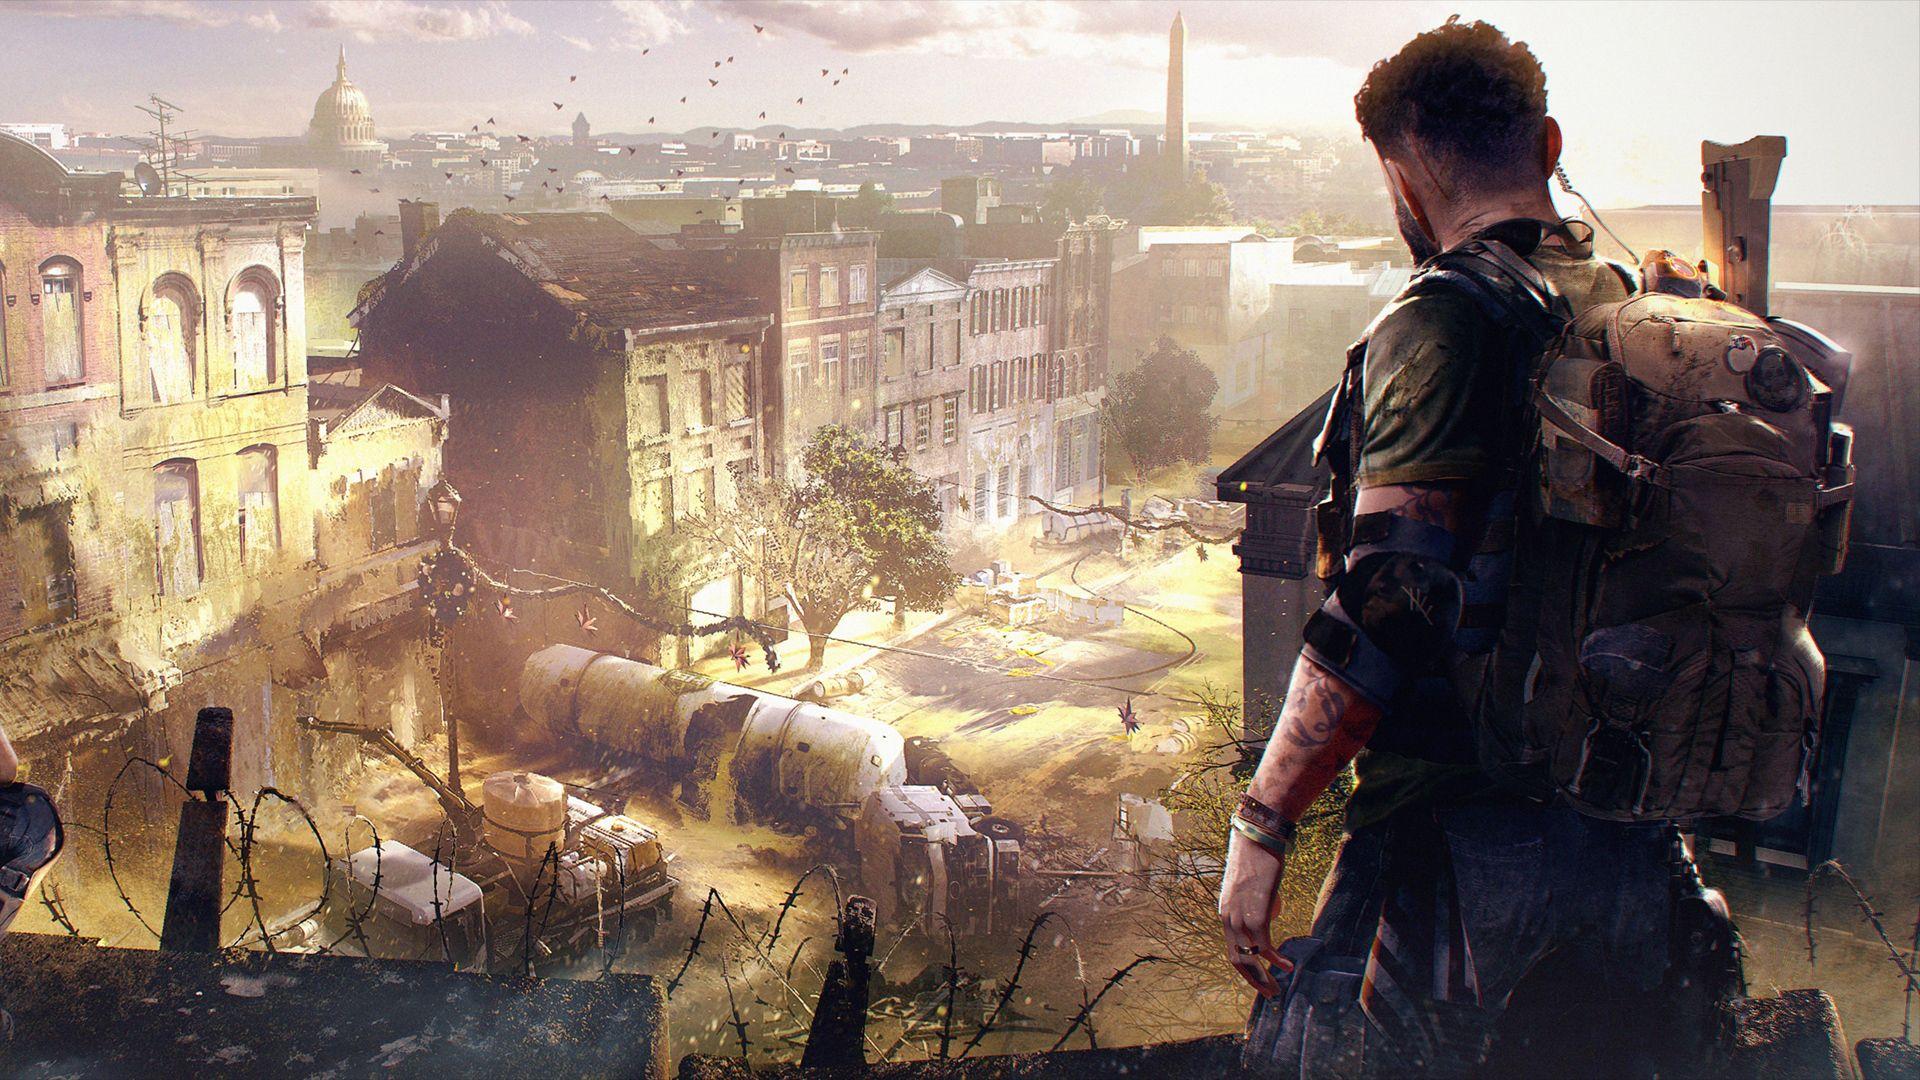 Division's lone scout. Wallpaper from Tom Clancy's The Division 2